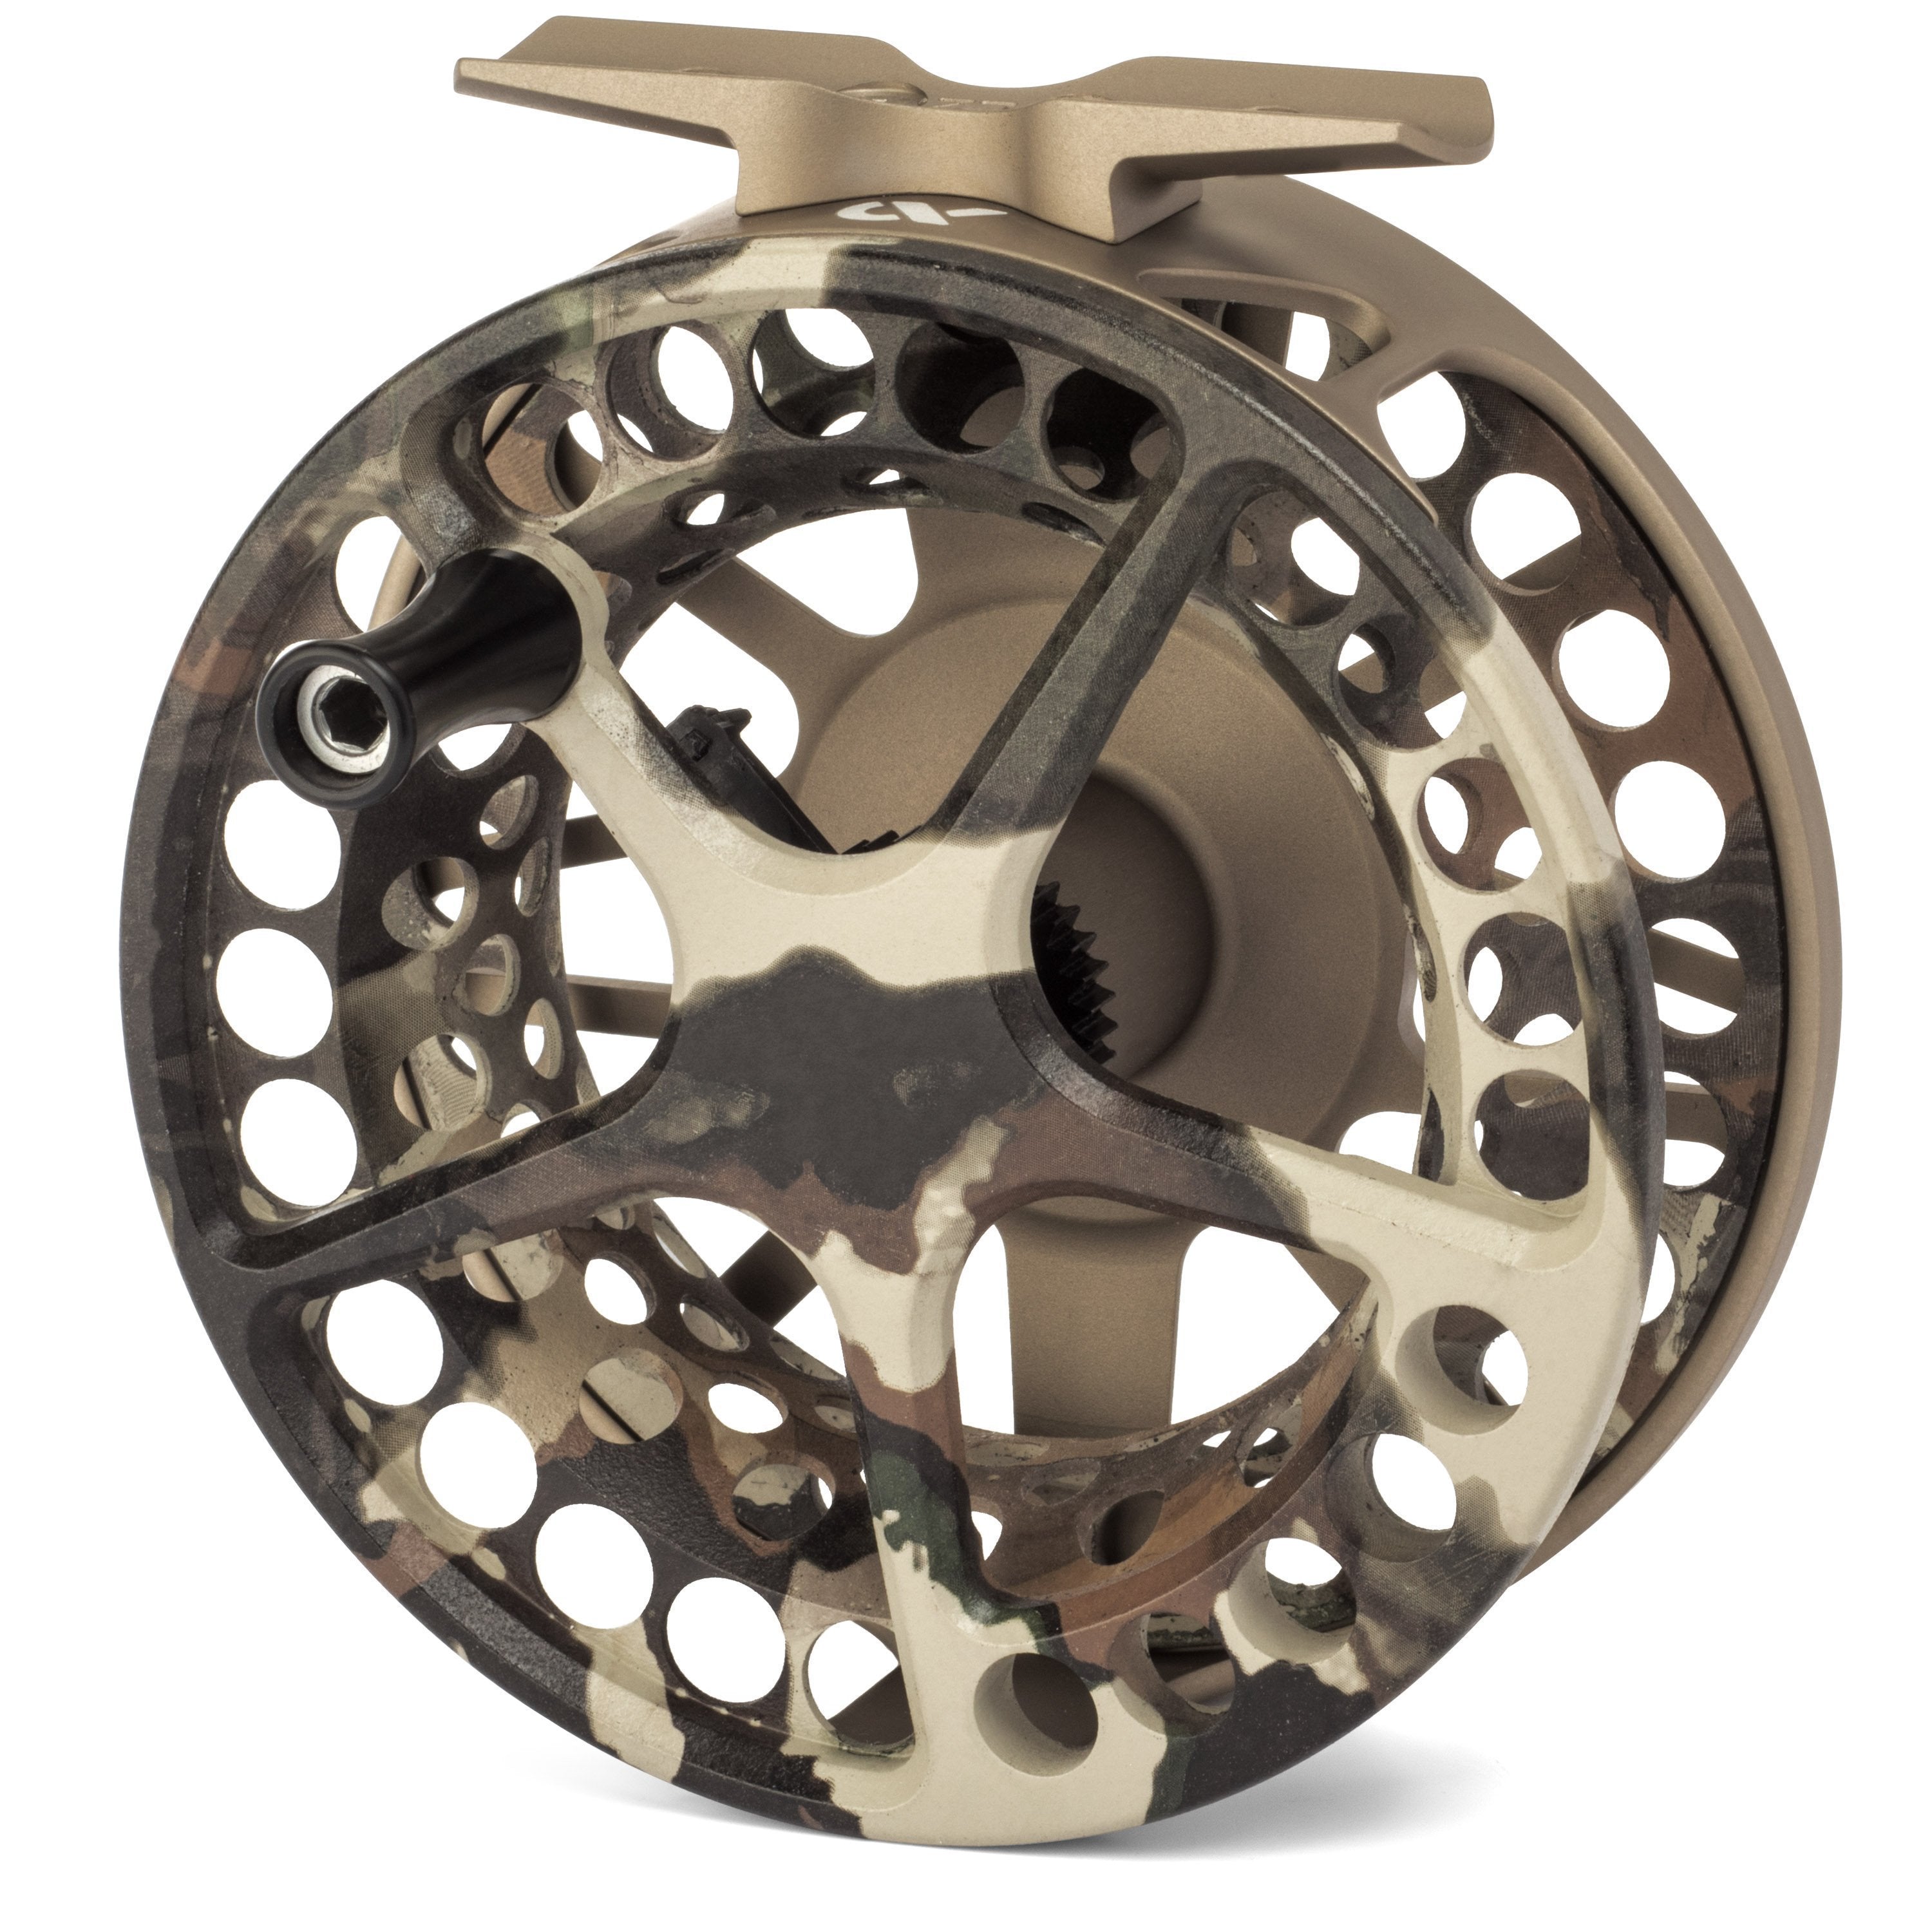 Lamson LiteSpeed G5 Fly Fishing Reel - Special Edition FIRST LITE